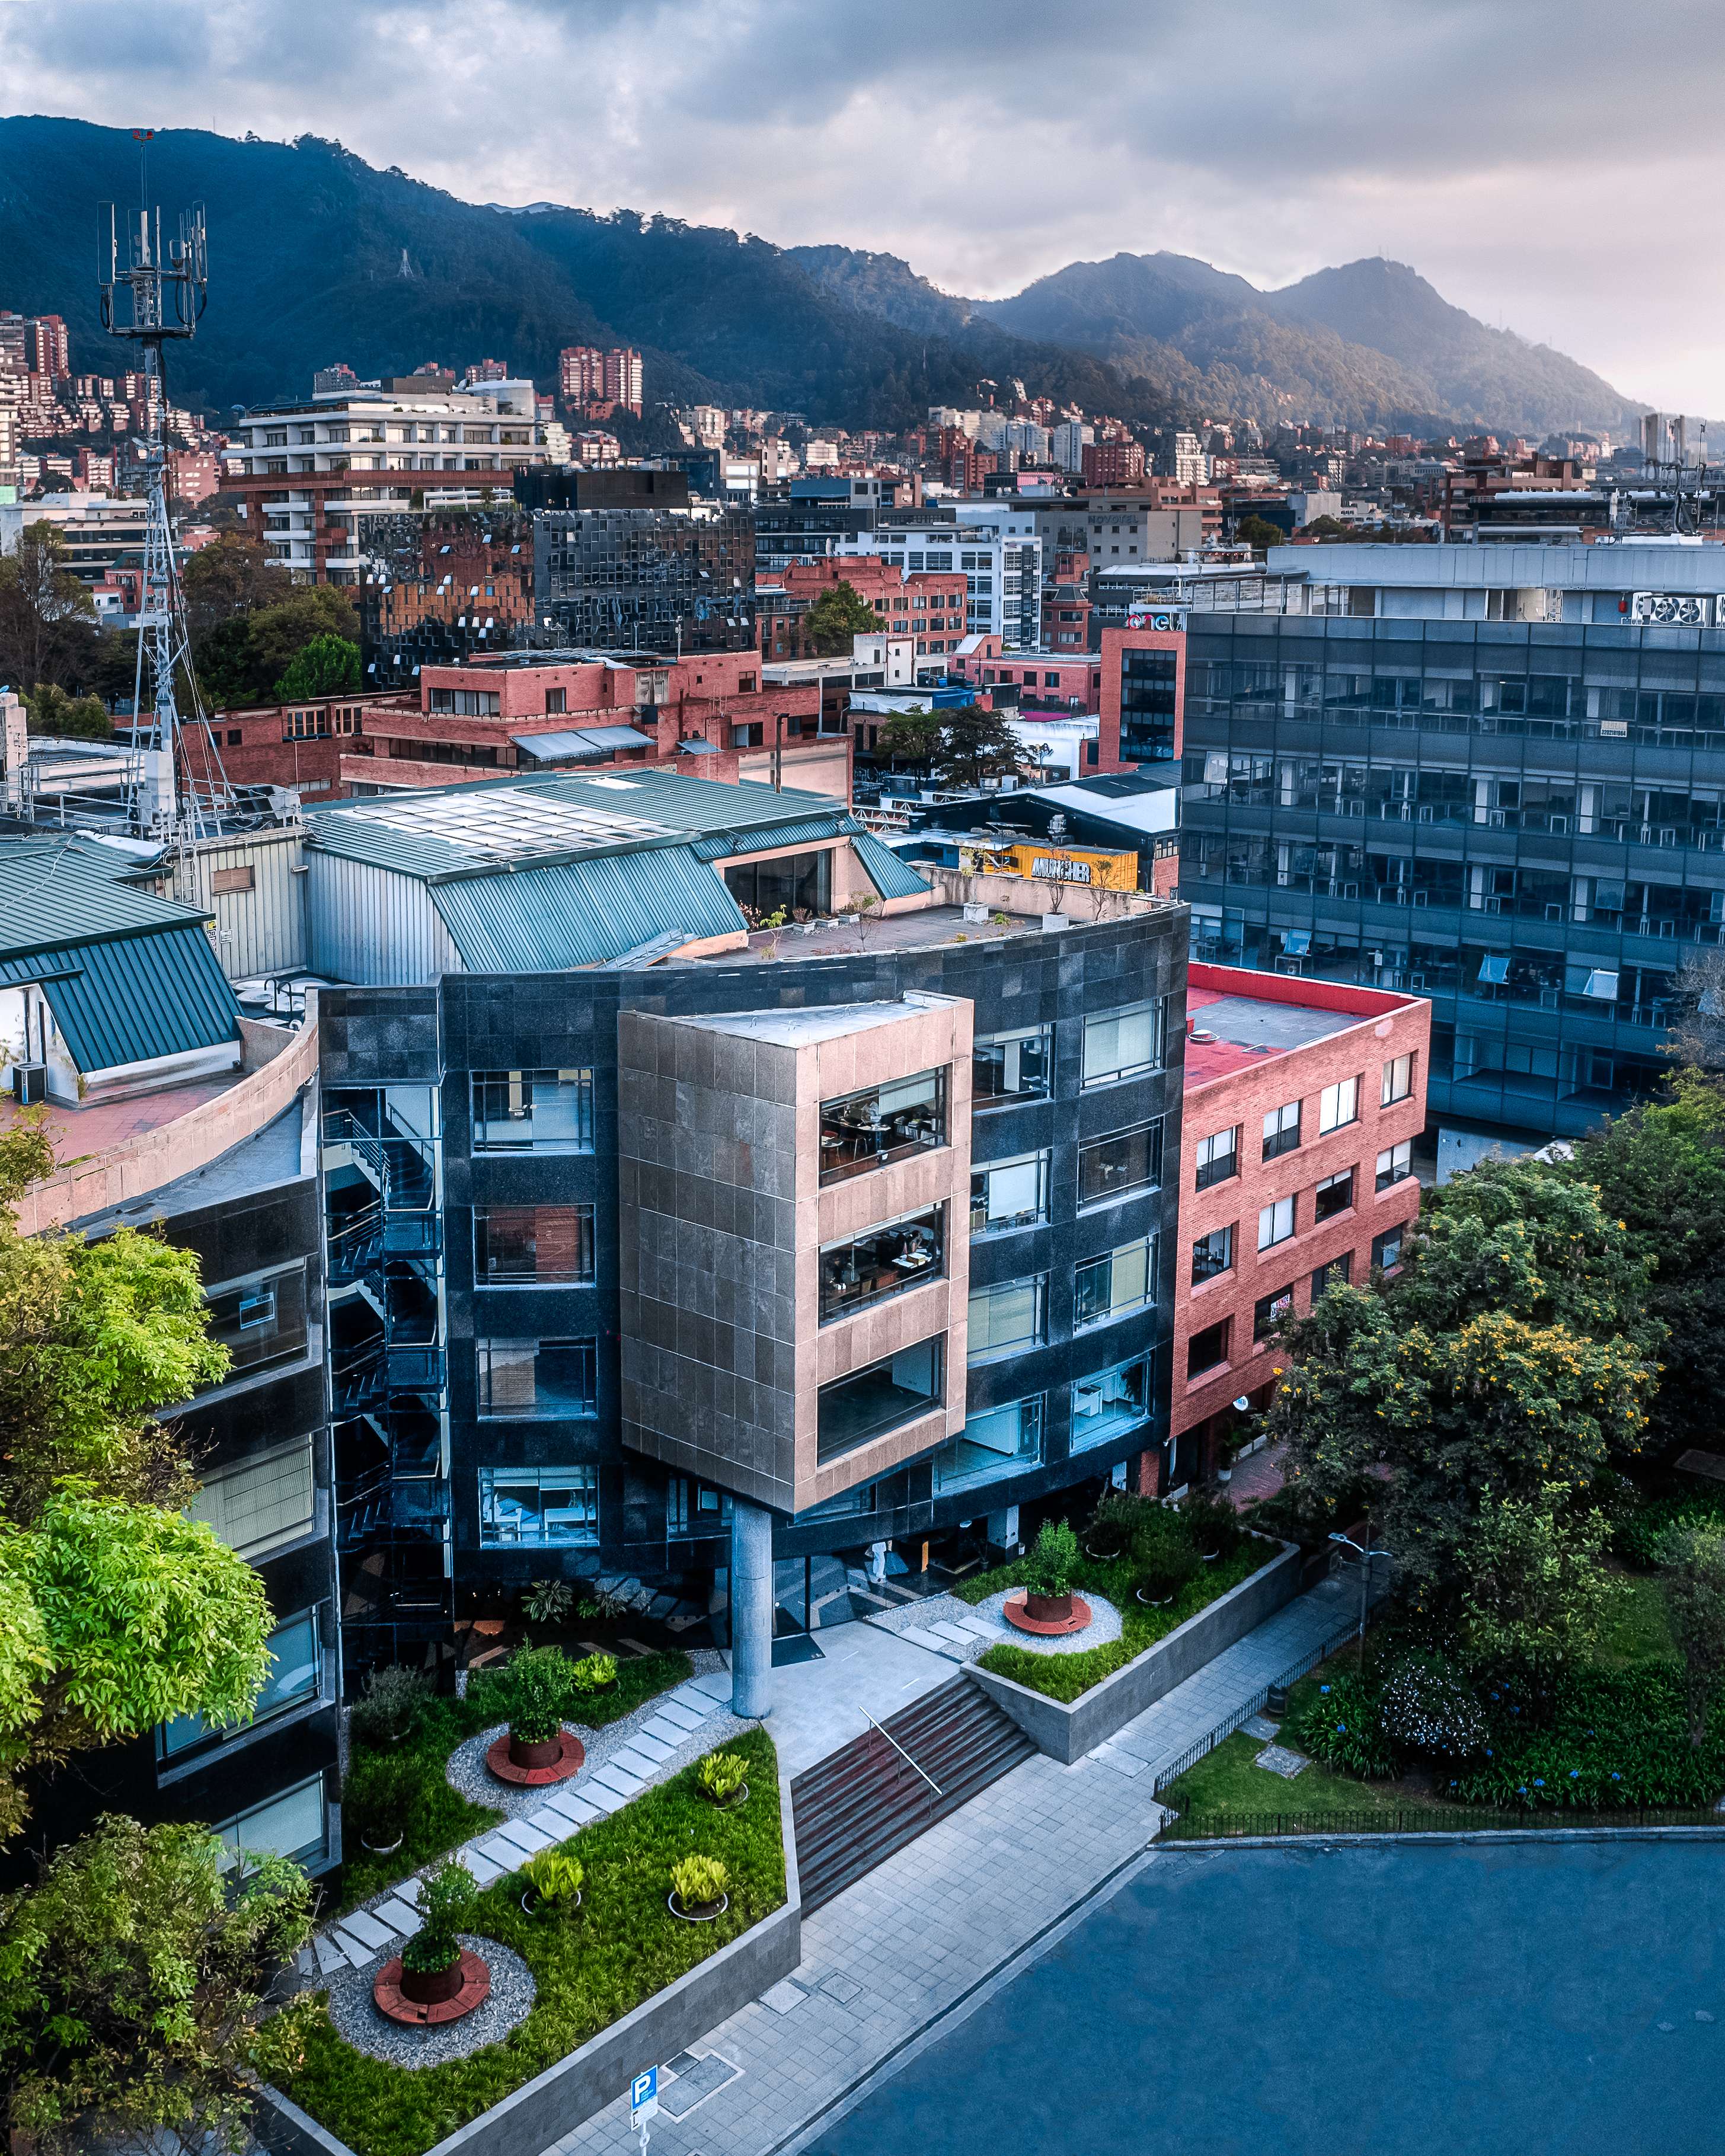 location-colombia-bogota-RTRC-wide-angle-rosen-group.jpg